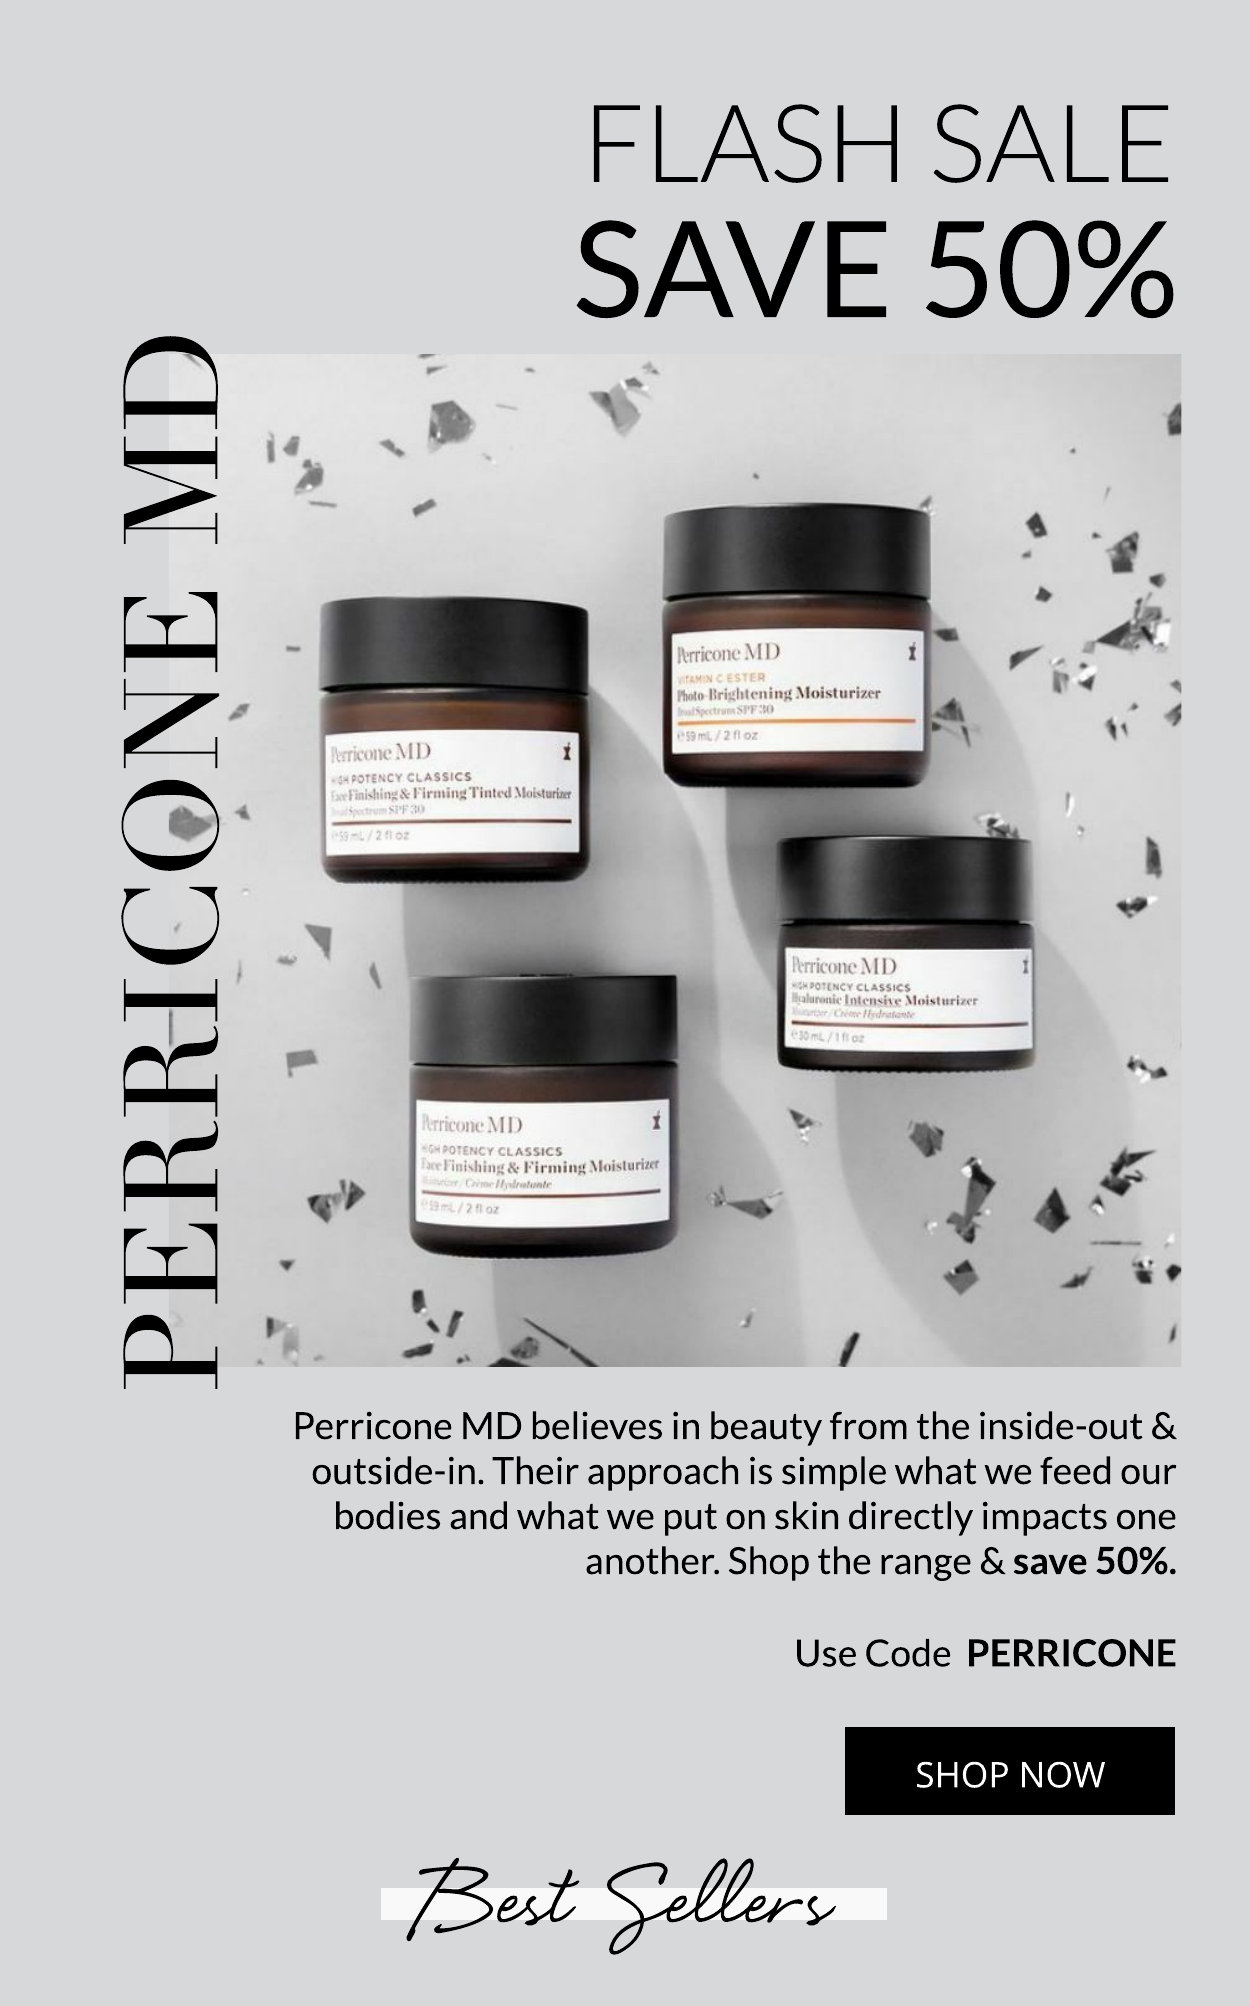 Save 50% on Perricone MD